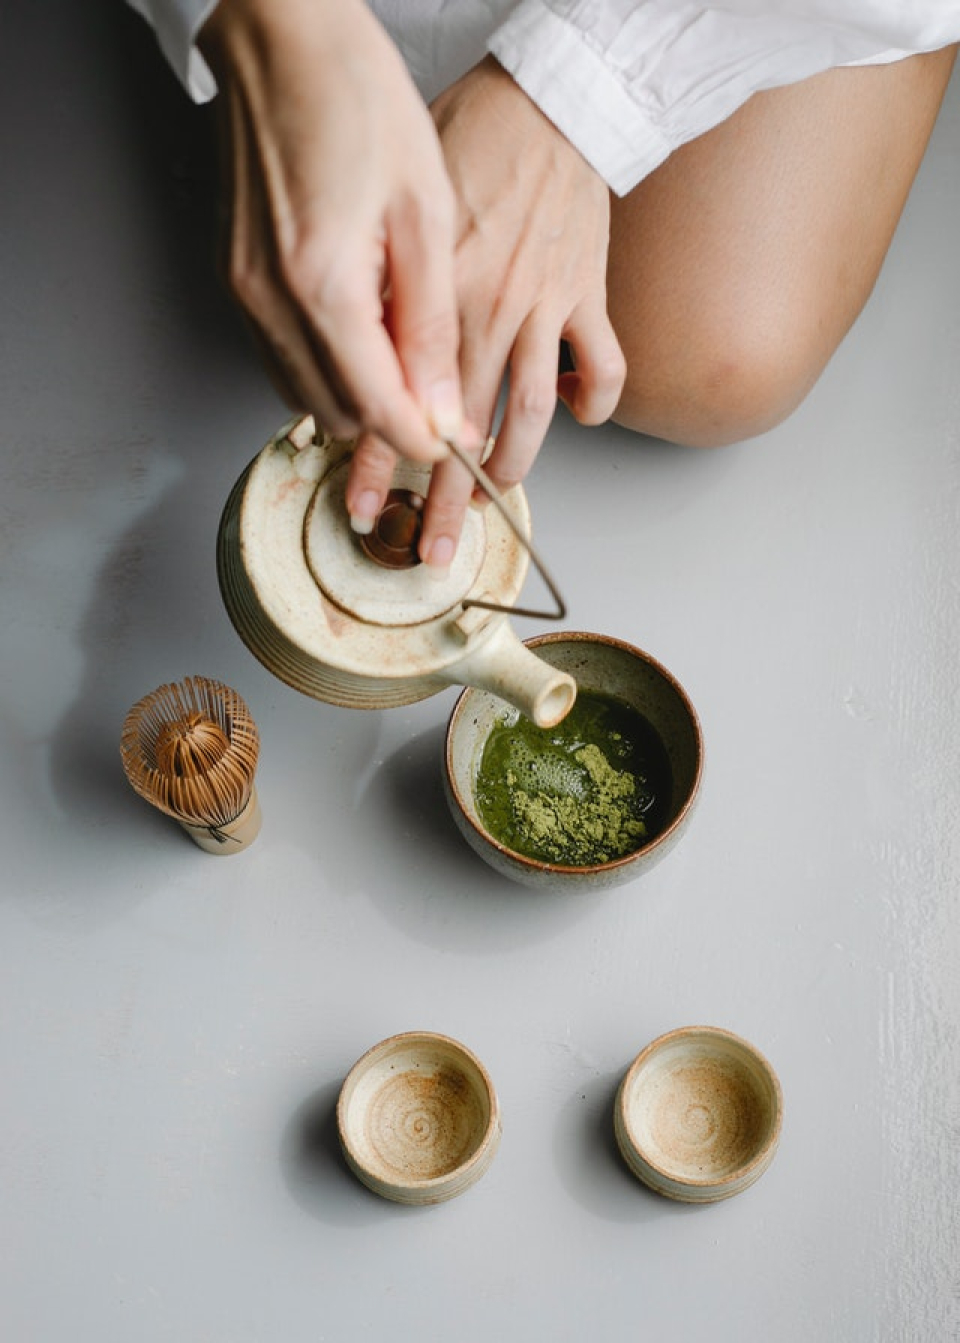 Ceai verde Matcha       Photo by Charlotte May from Pexels